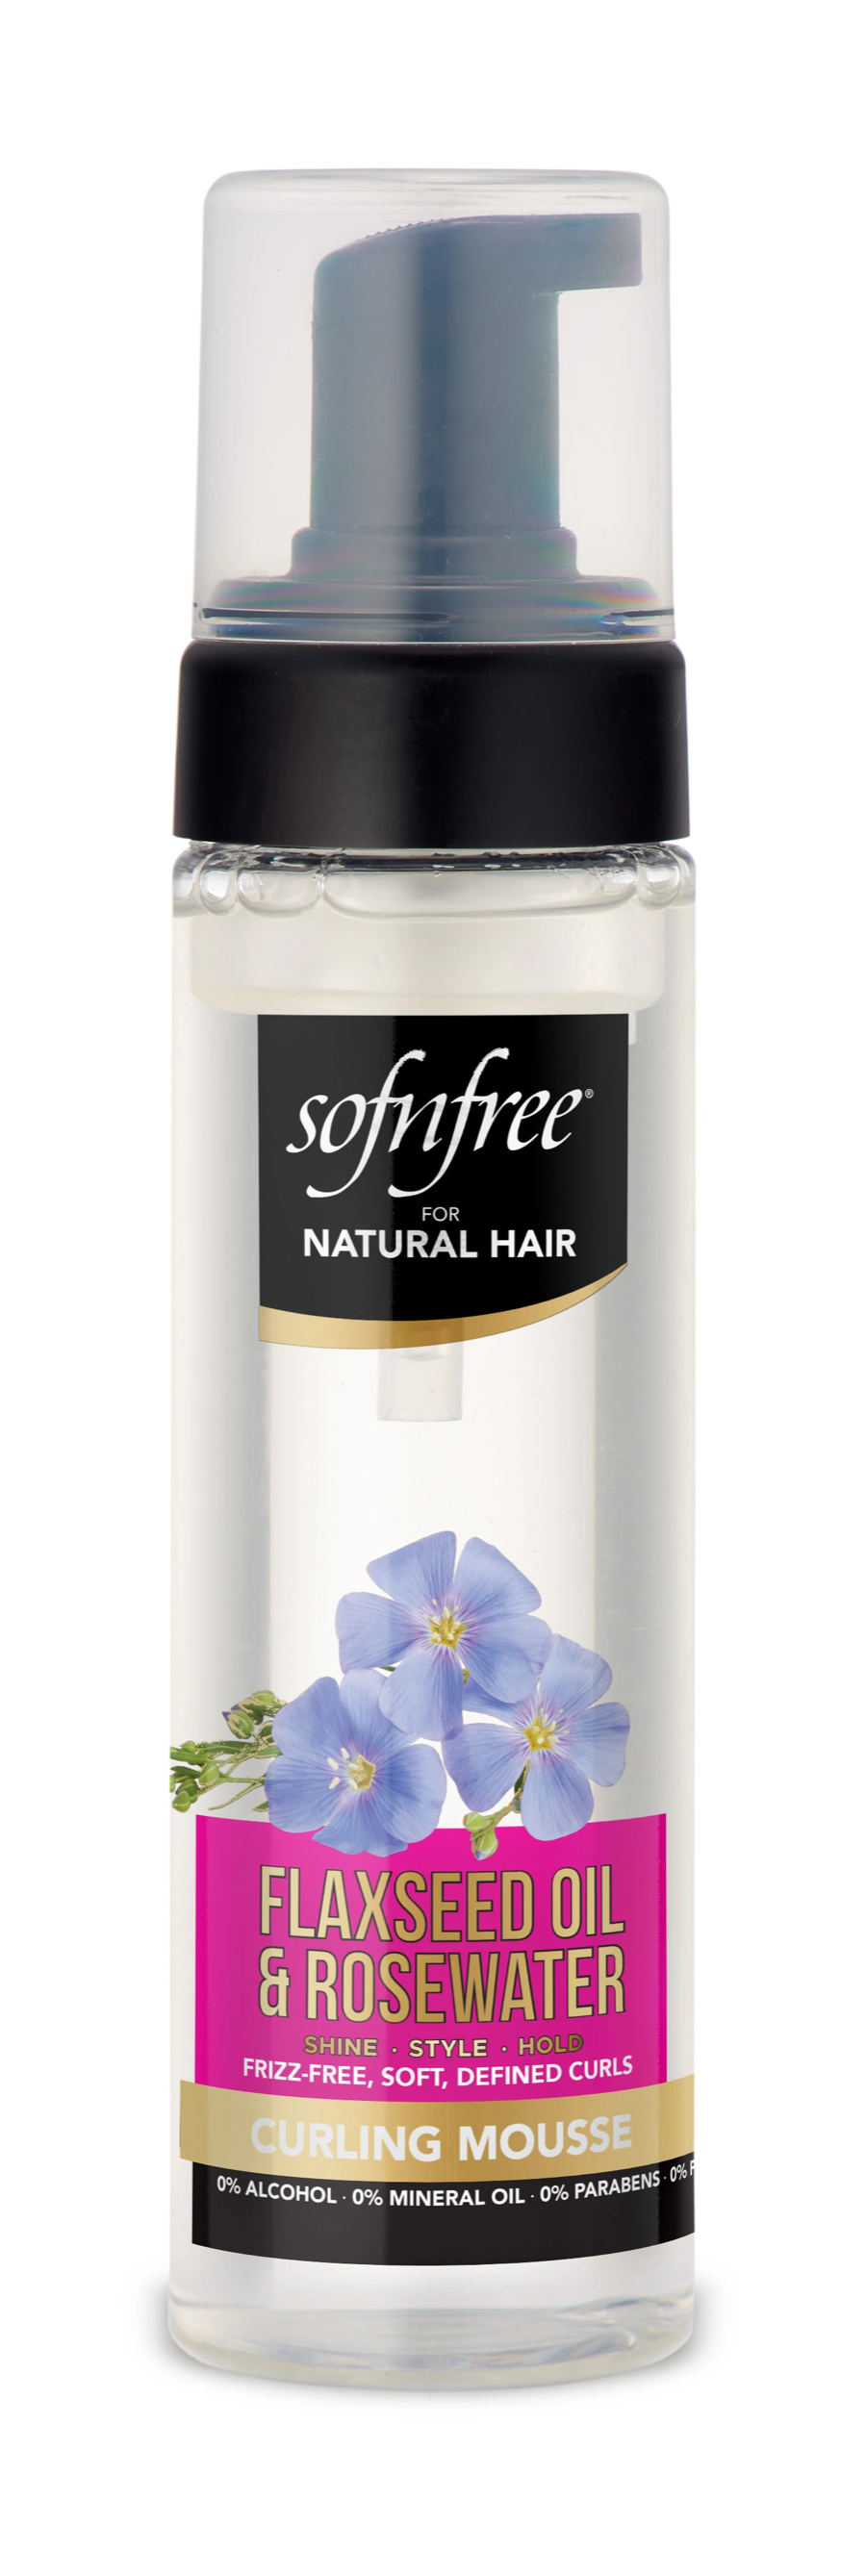 Sofn'free Flaxseed Oil & Rosewater Curling Mousse 200ml